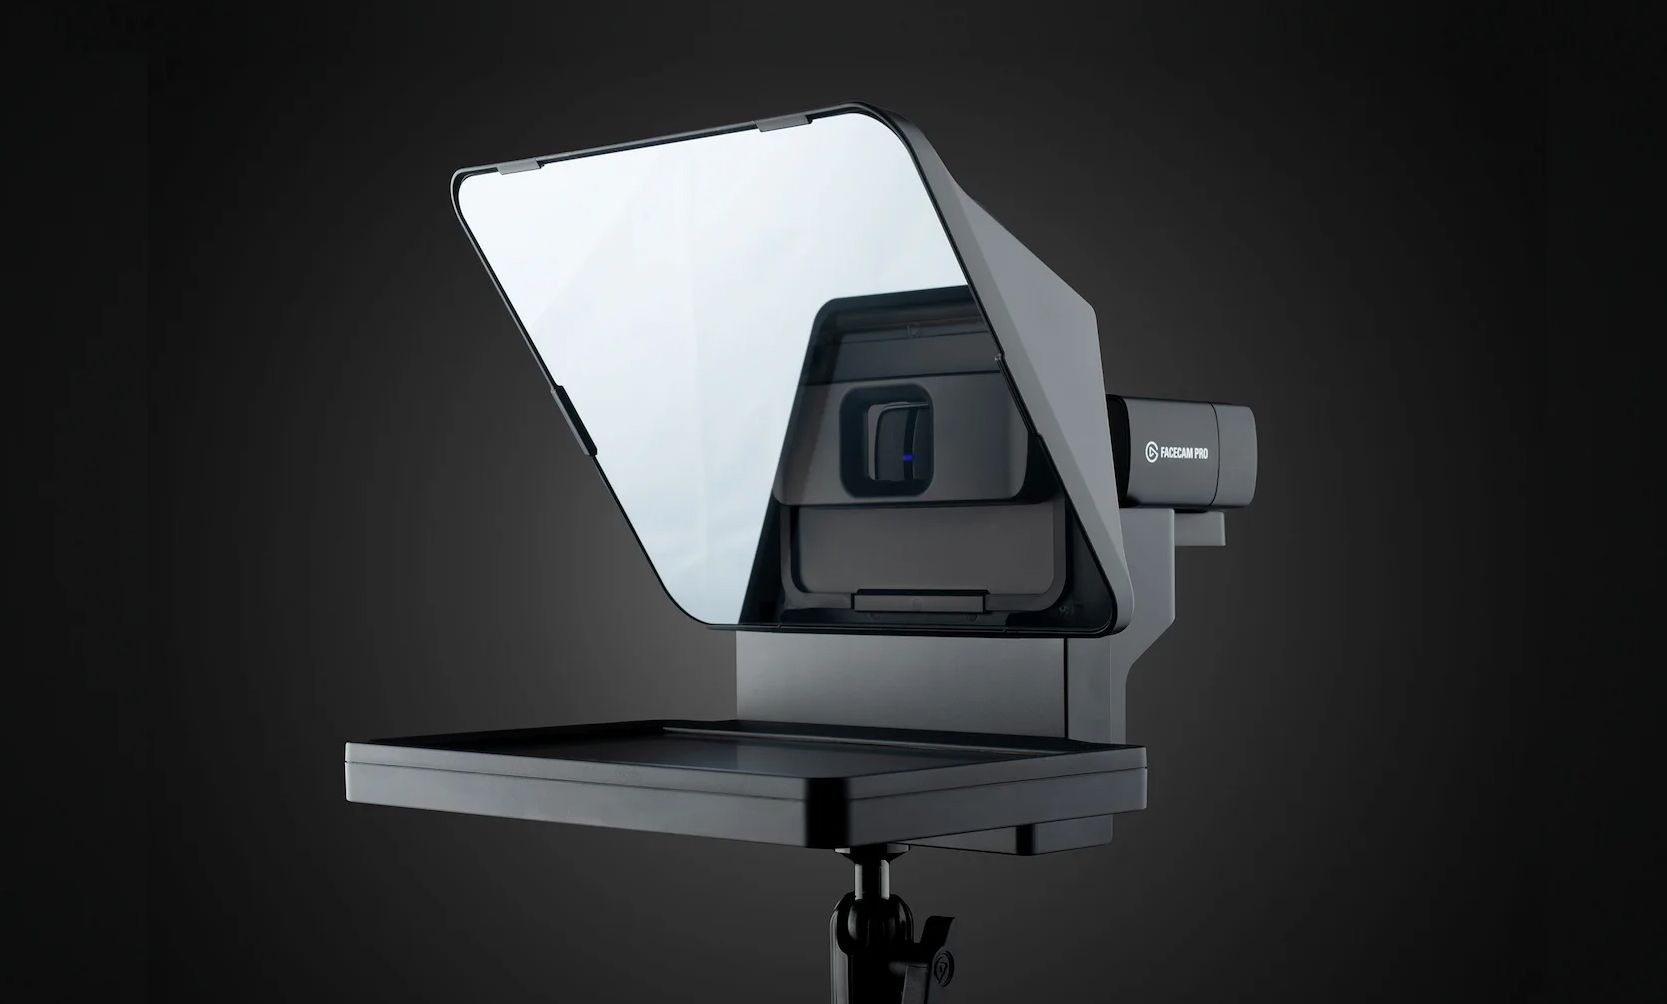 A product shot of the new Elgato prompter product with a Elgato Face Cam 4K and black background